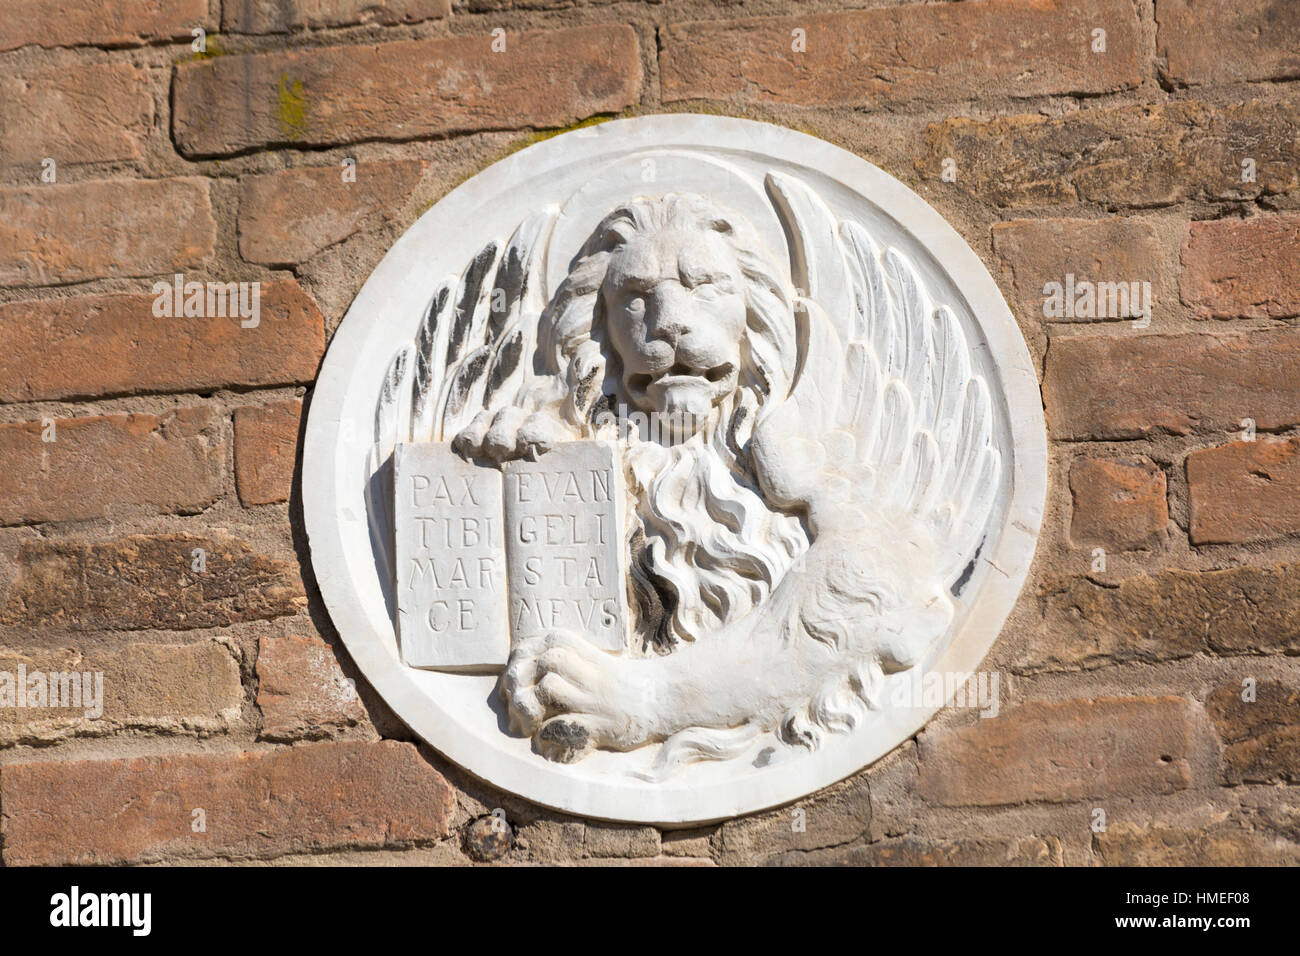 Plaque with winged lion showing the motto of Venice pax tibi mar ce evan geli sta mevs, Peace be upon you O Mark my Evangelist, at Venice, Italy Stock Photo